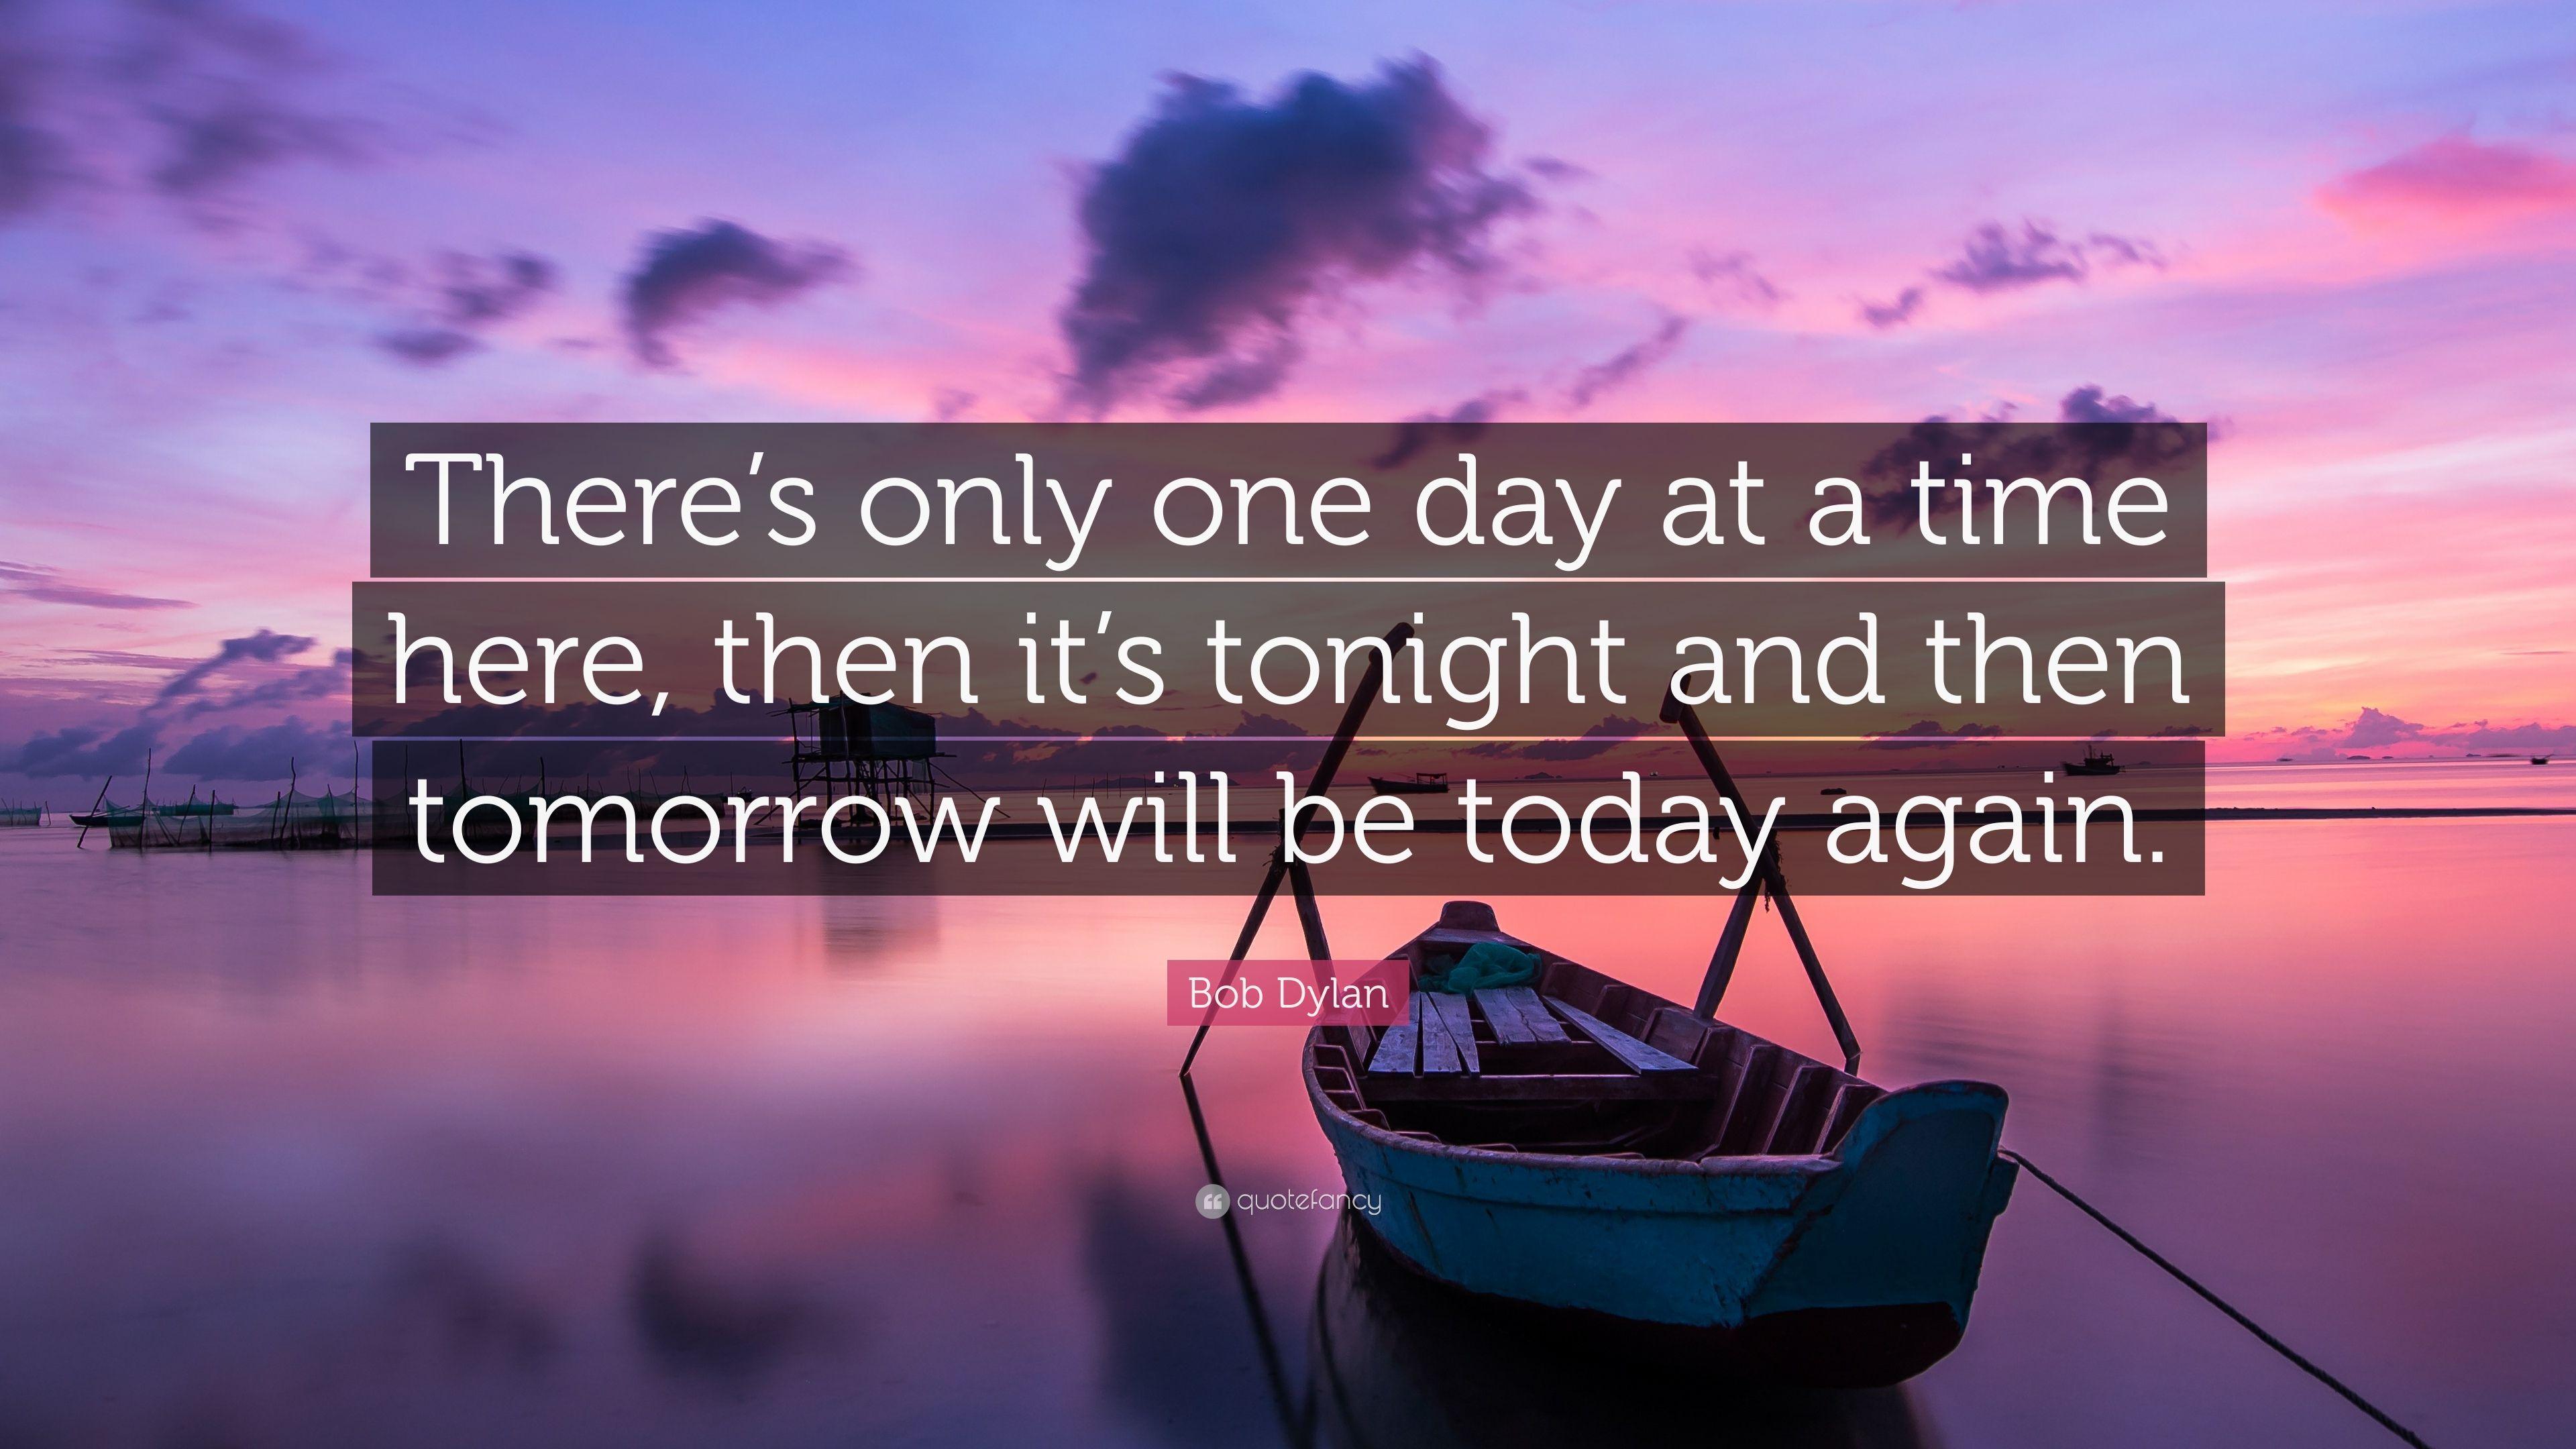 Bob Dylan Quote: “There's only one day at a time here, then it's